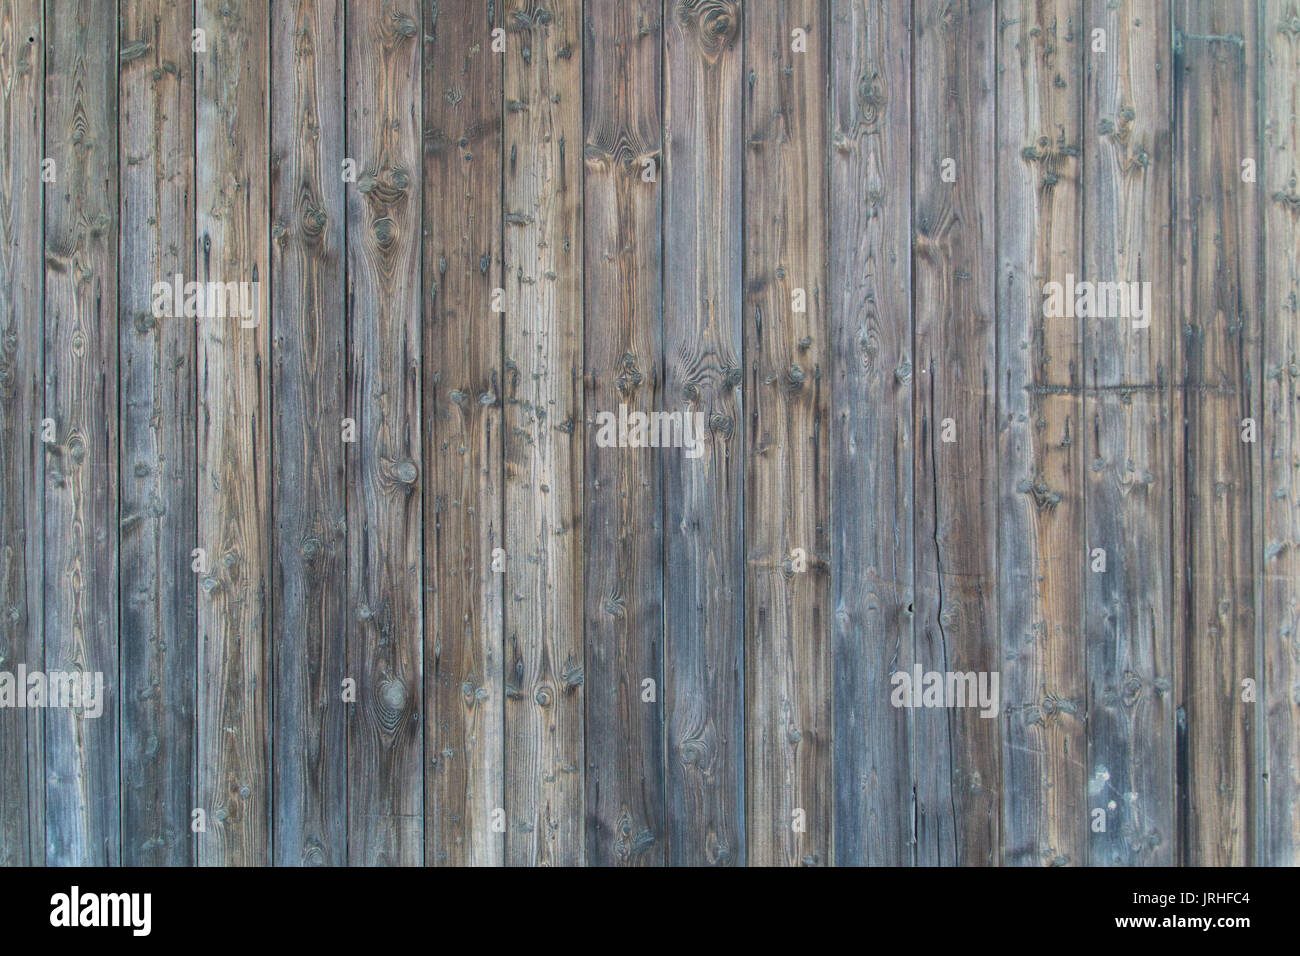 Brown wood board wall background texture closeup Banque D'Images